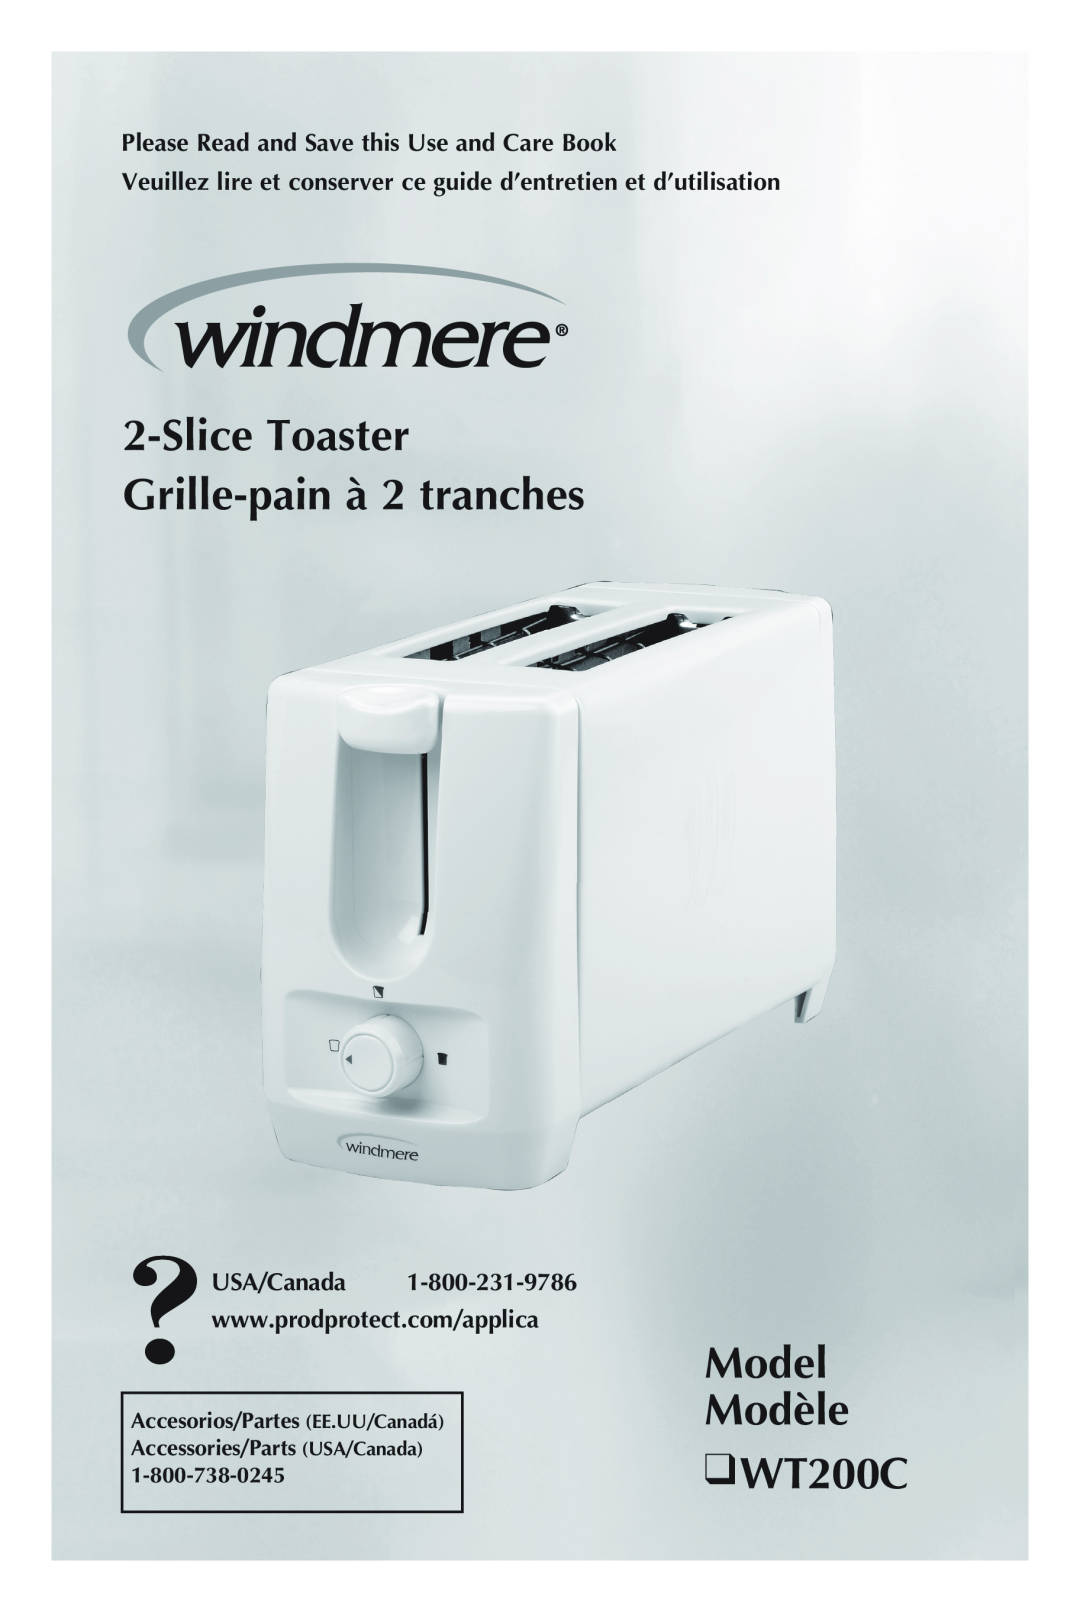 Windmere manual Model Modèle WT200C, SliceToaster Grille-painà 2 tranches, Please Read and Save this Use and Care Book 